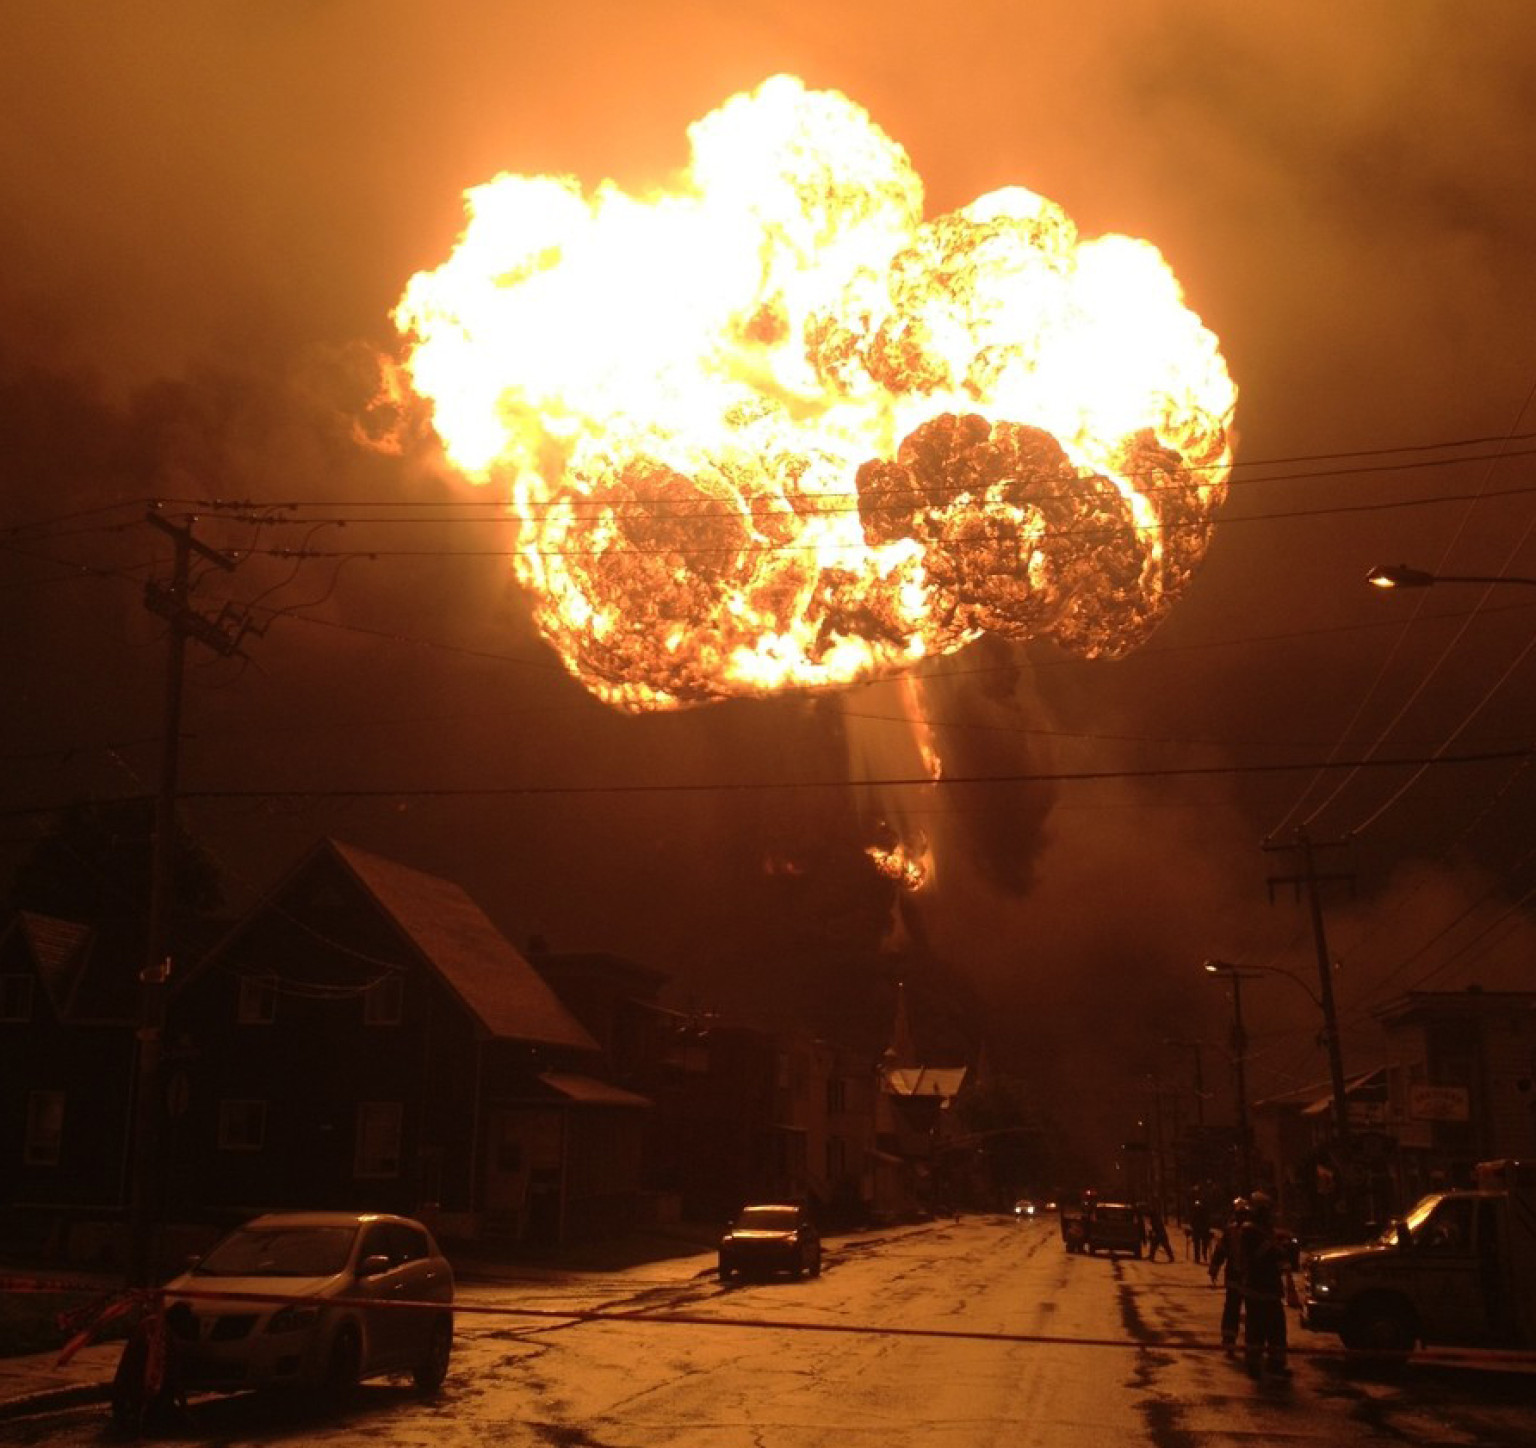 Lac-Mégantic's Disaster is the Poster Child for Fossil Fuel Folly